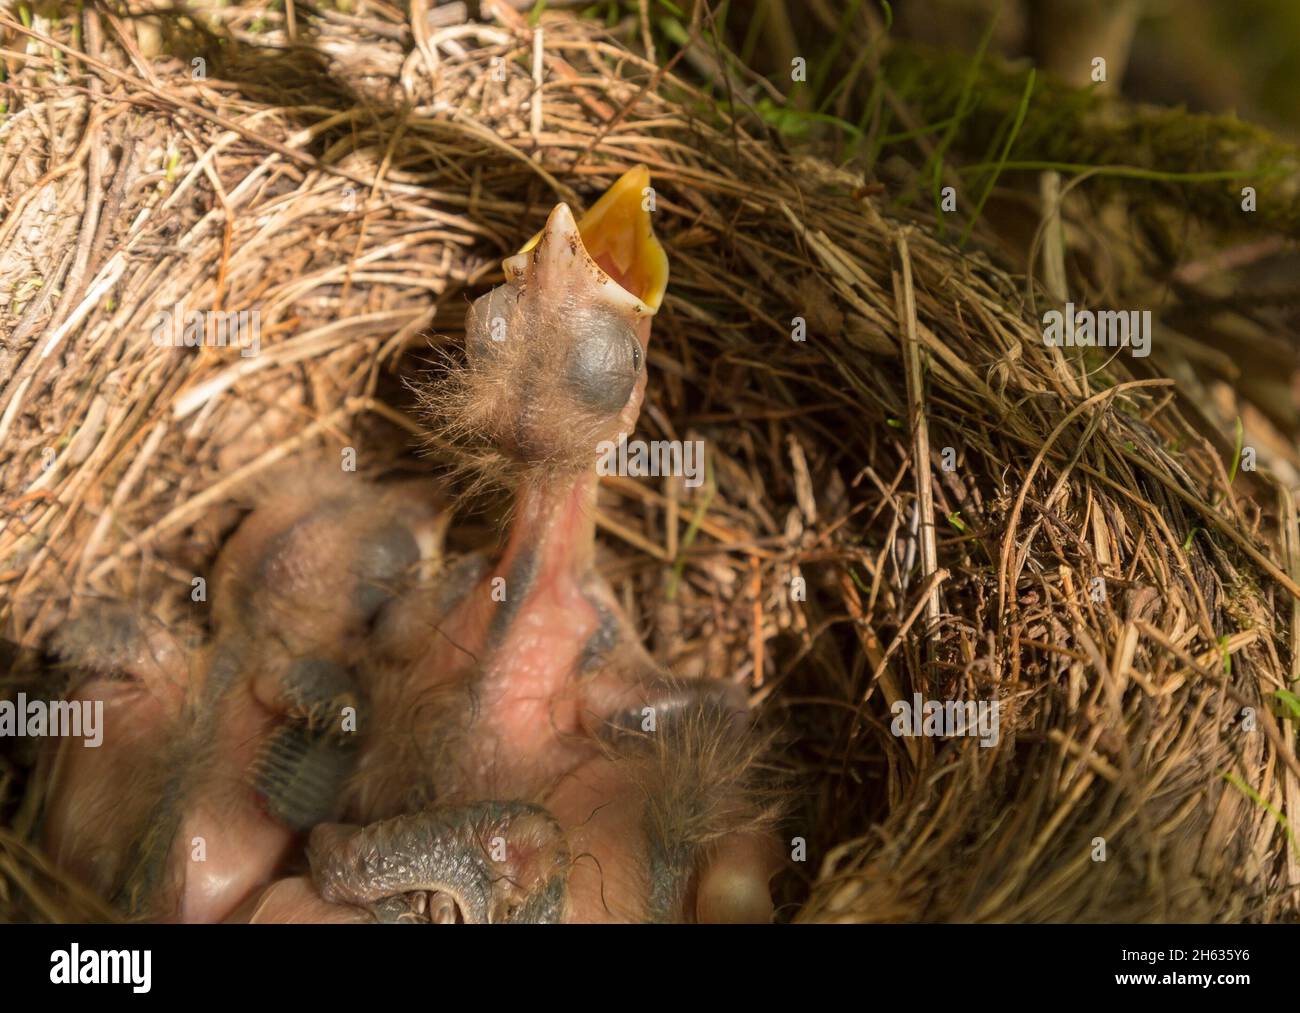 close up of a blackbird nestling in a nest Stock Photo